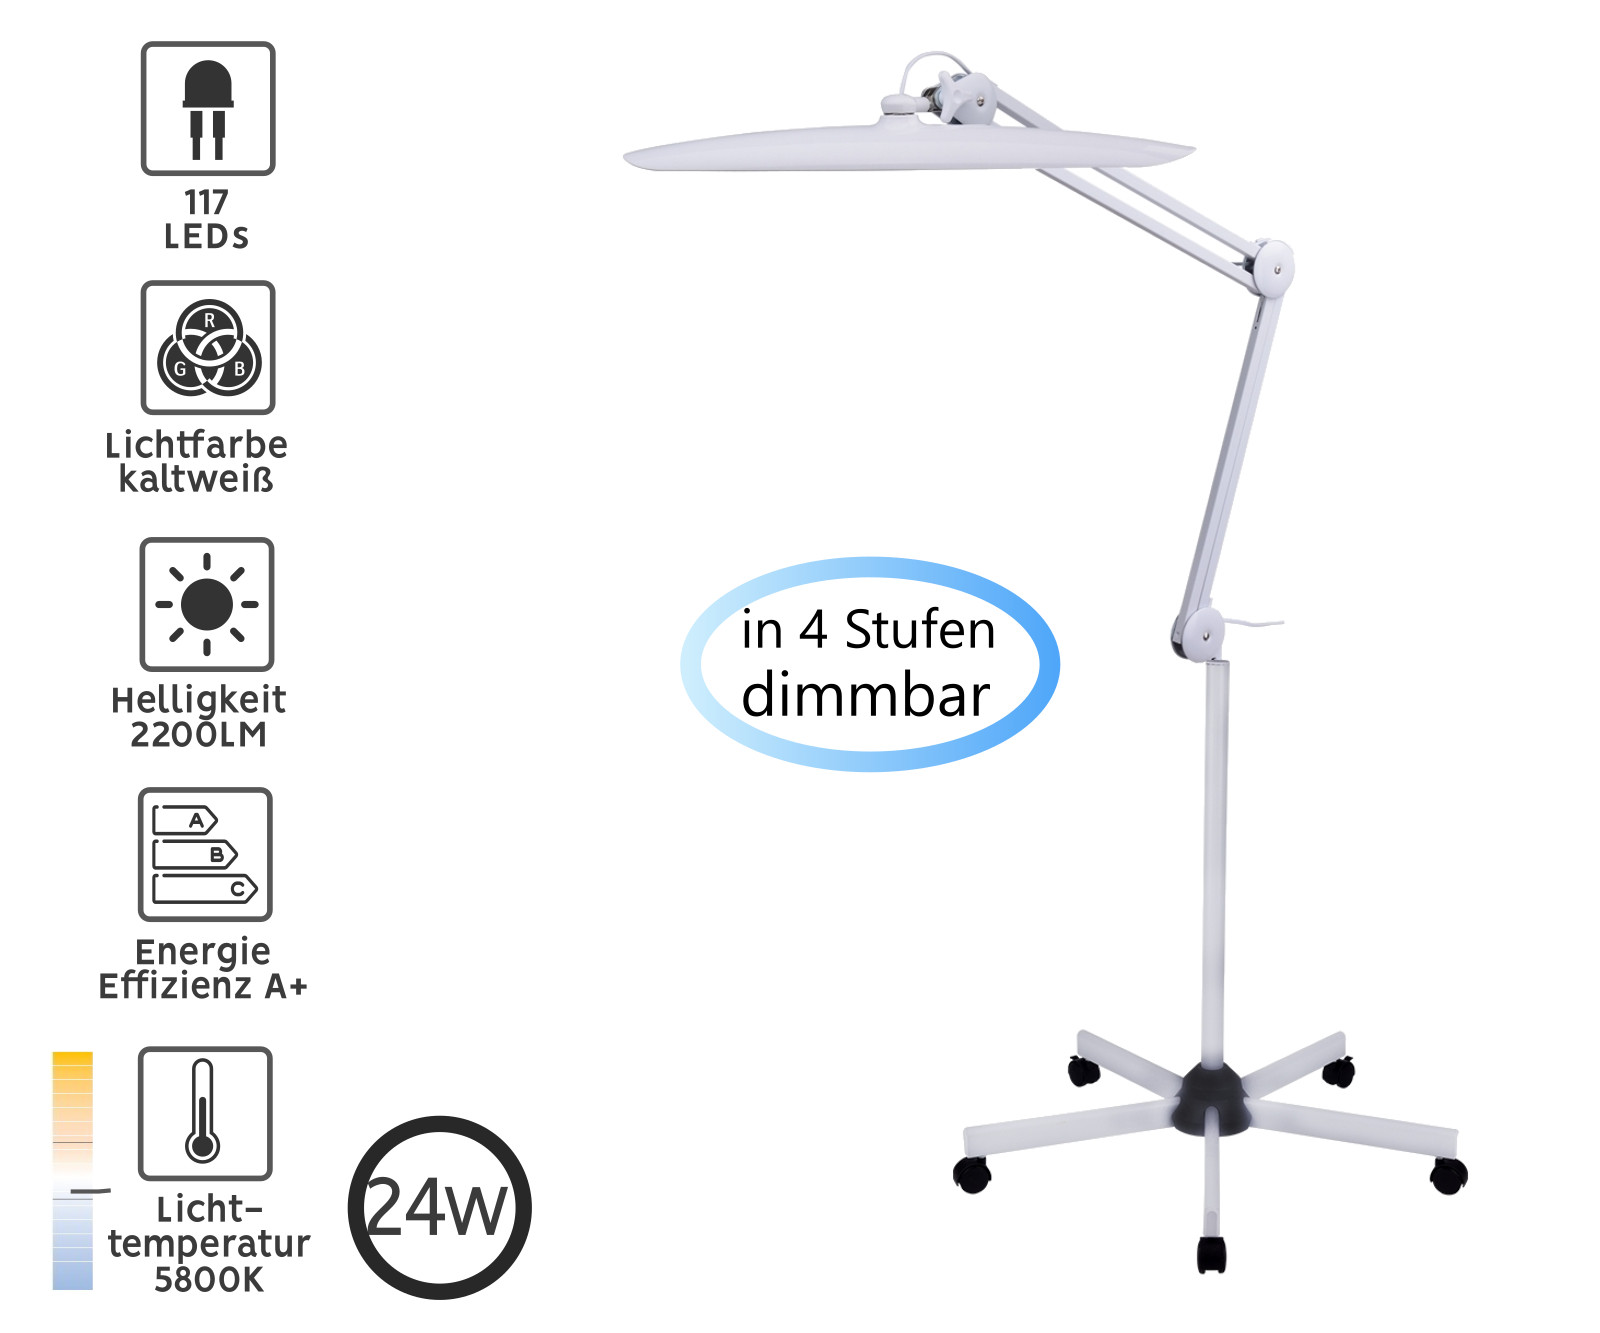 21,5W work lamp with dimmer and wheeled stand